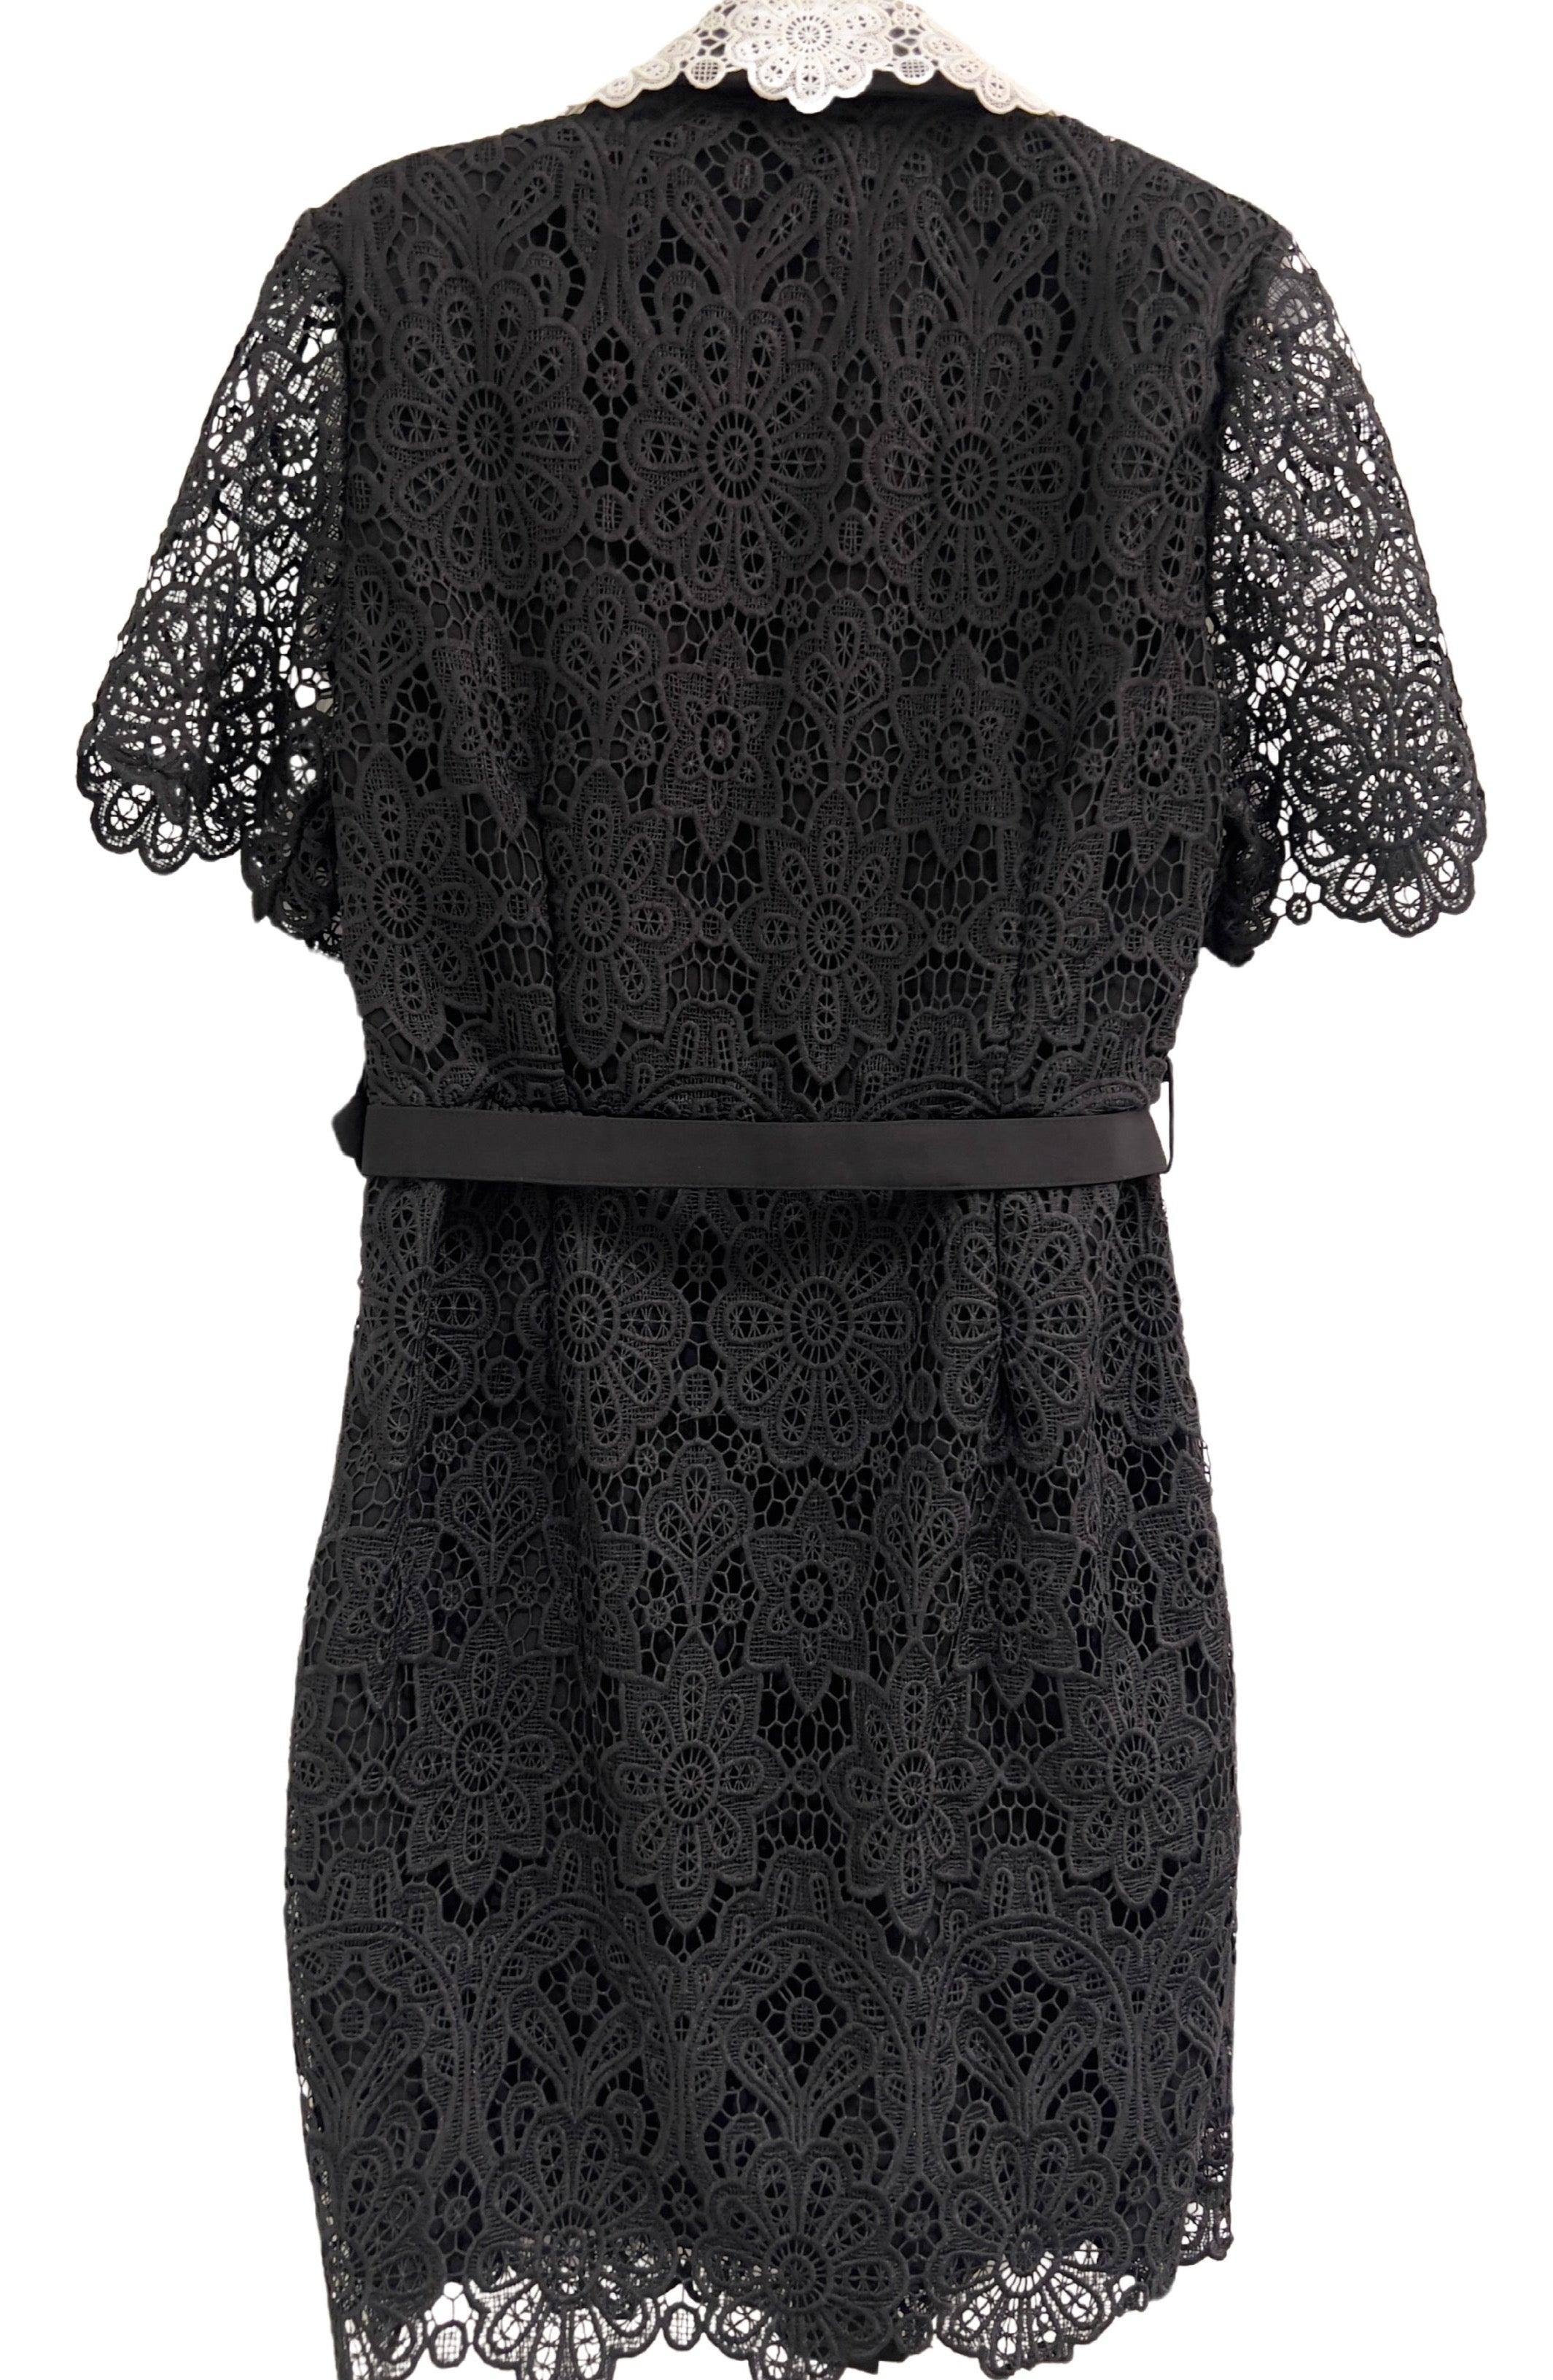 Black Lace Dress With White Lace Collar - BTK COLLECTION